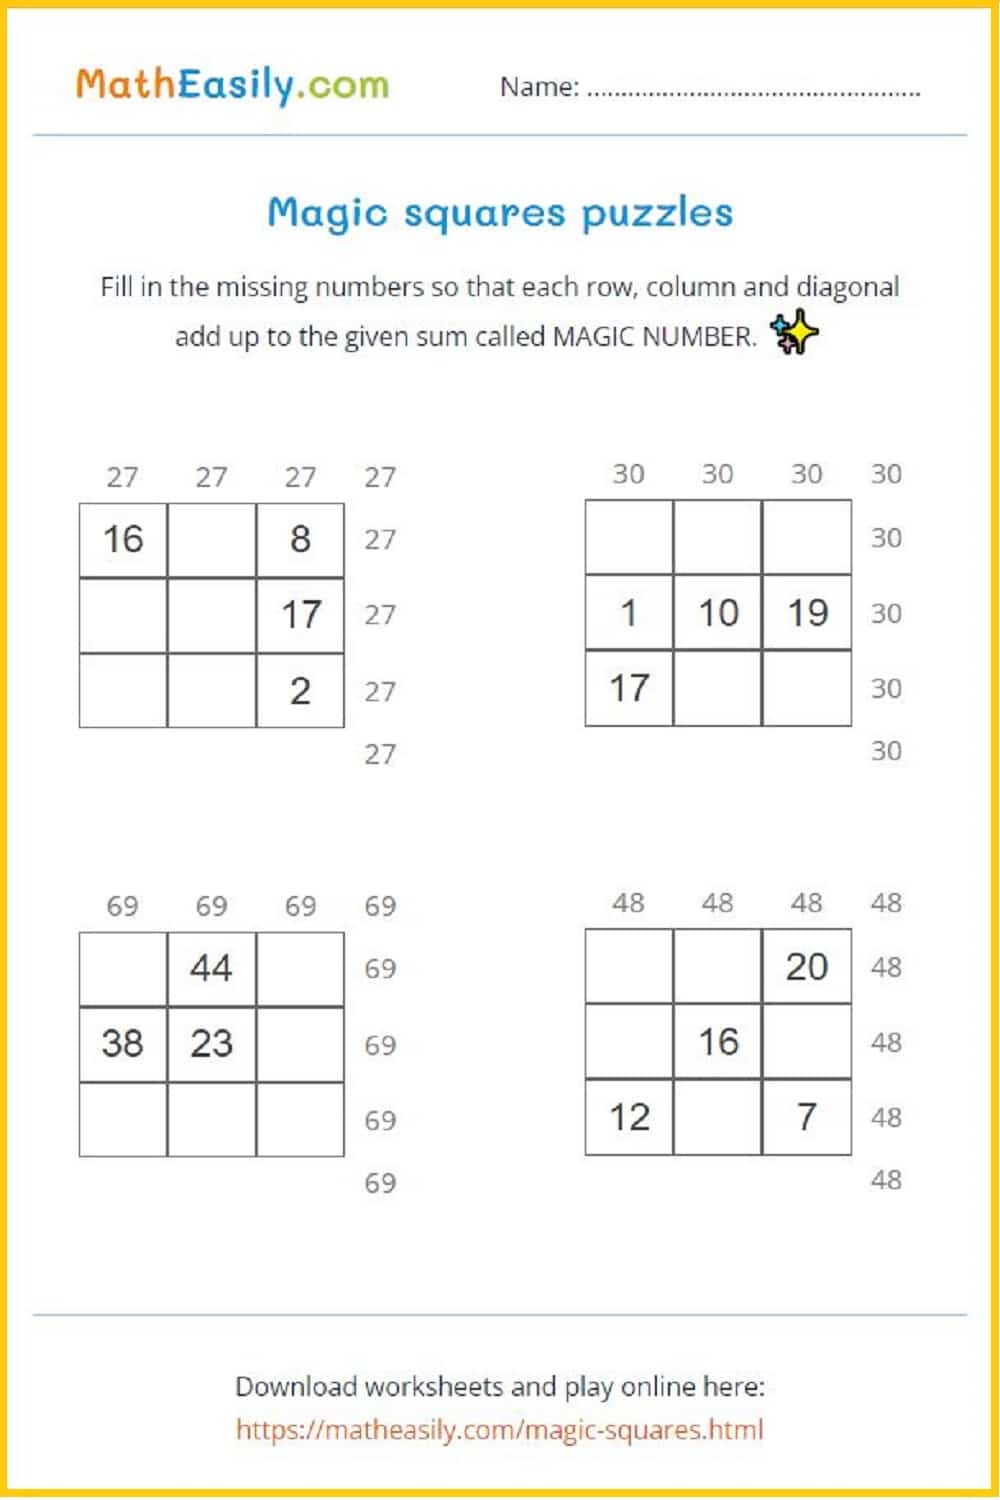 problem solving puzzles printable maths puzzles pdf. printable math puzzles PDF. solve math puzzle online. printable math brain teasers 
worksheets pdf. kids maths puzzles for kids. mathematical puzzles. Printable math puzzle games. number games puzzles printable.
  math puzzle worksheets. printable math puzzles with answers PDF.